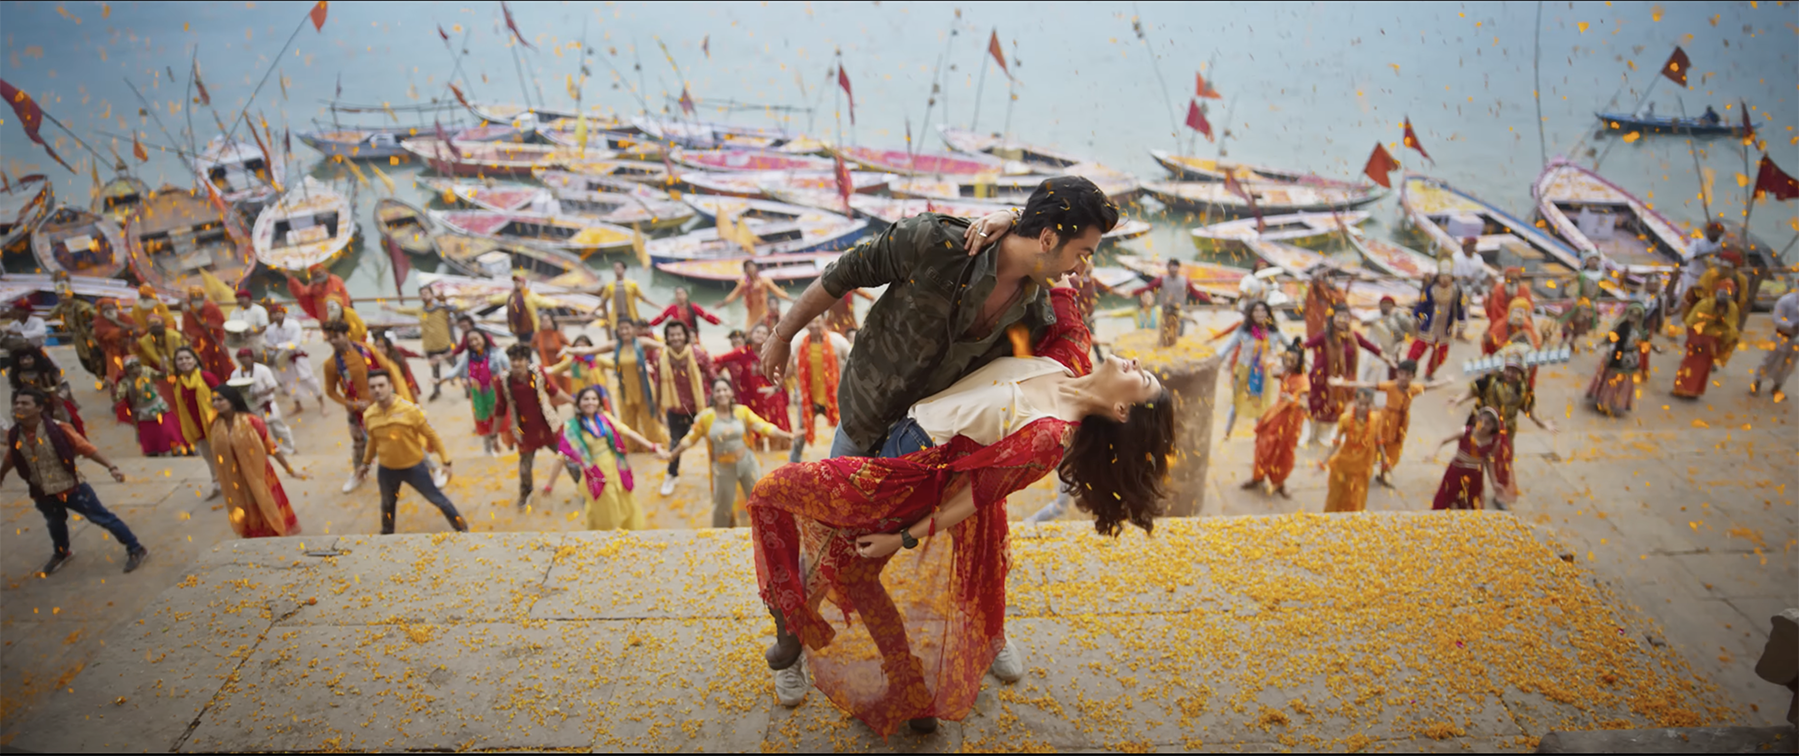 Ranbir Kapoor and Alia Bhatt dancing during the song “Kesariya” in their new movie Brahmastra Part One: Shiva. Photo Courtesy of Dharma Productions and Starlight Pictures